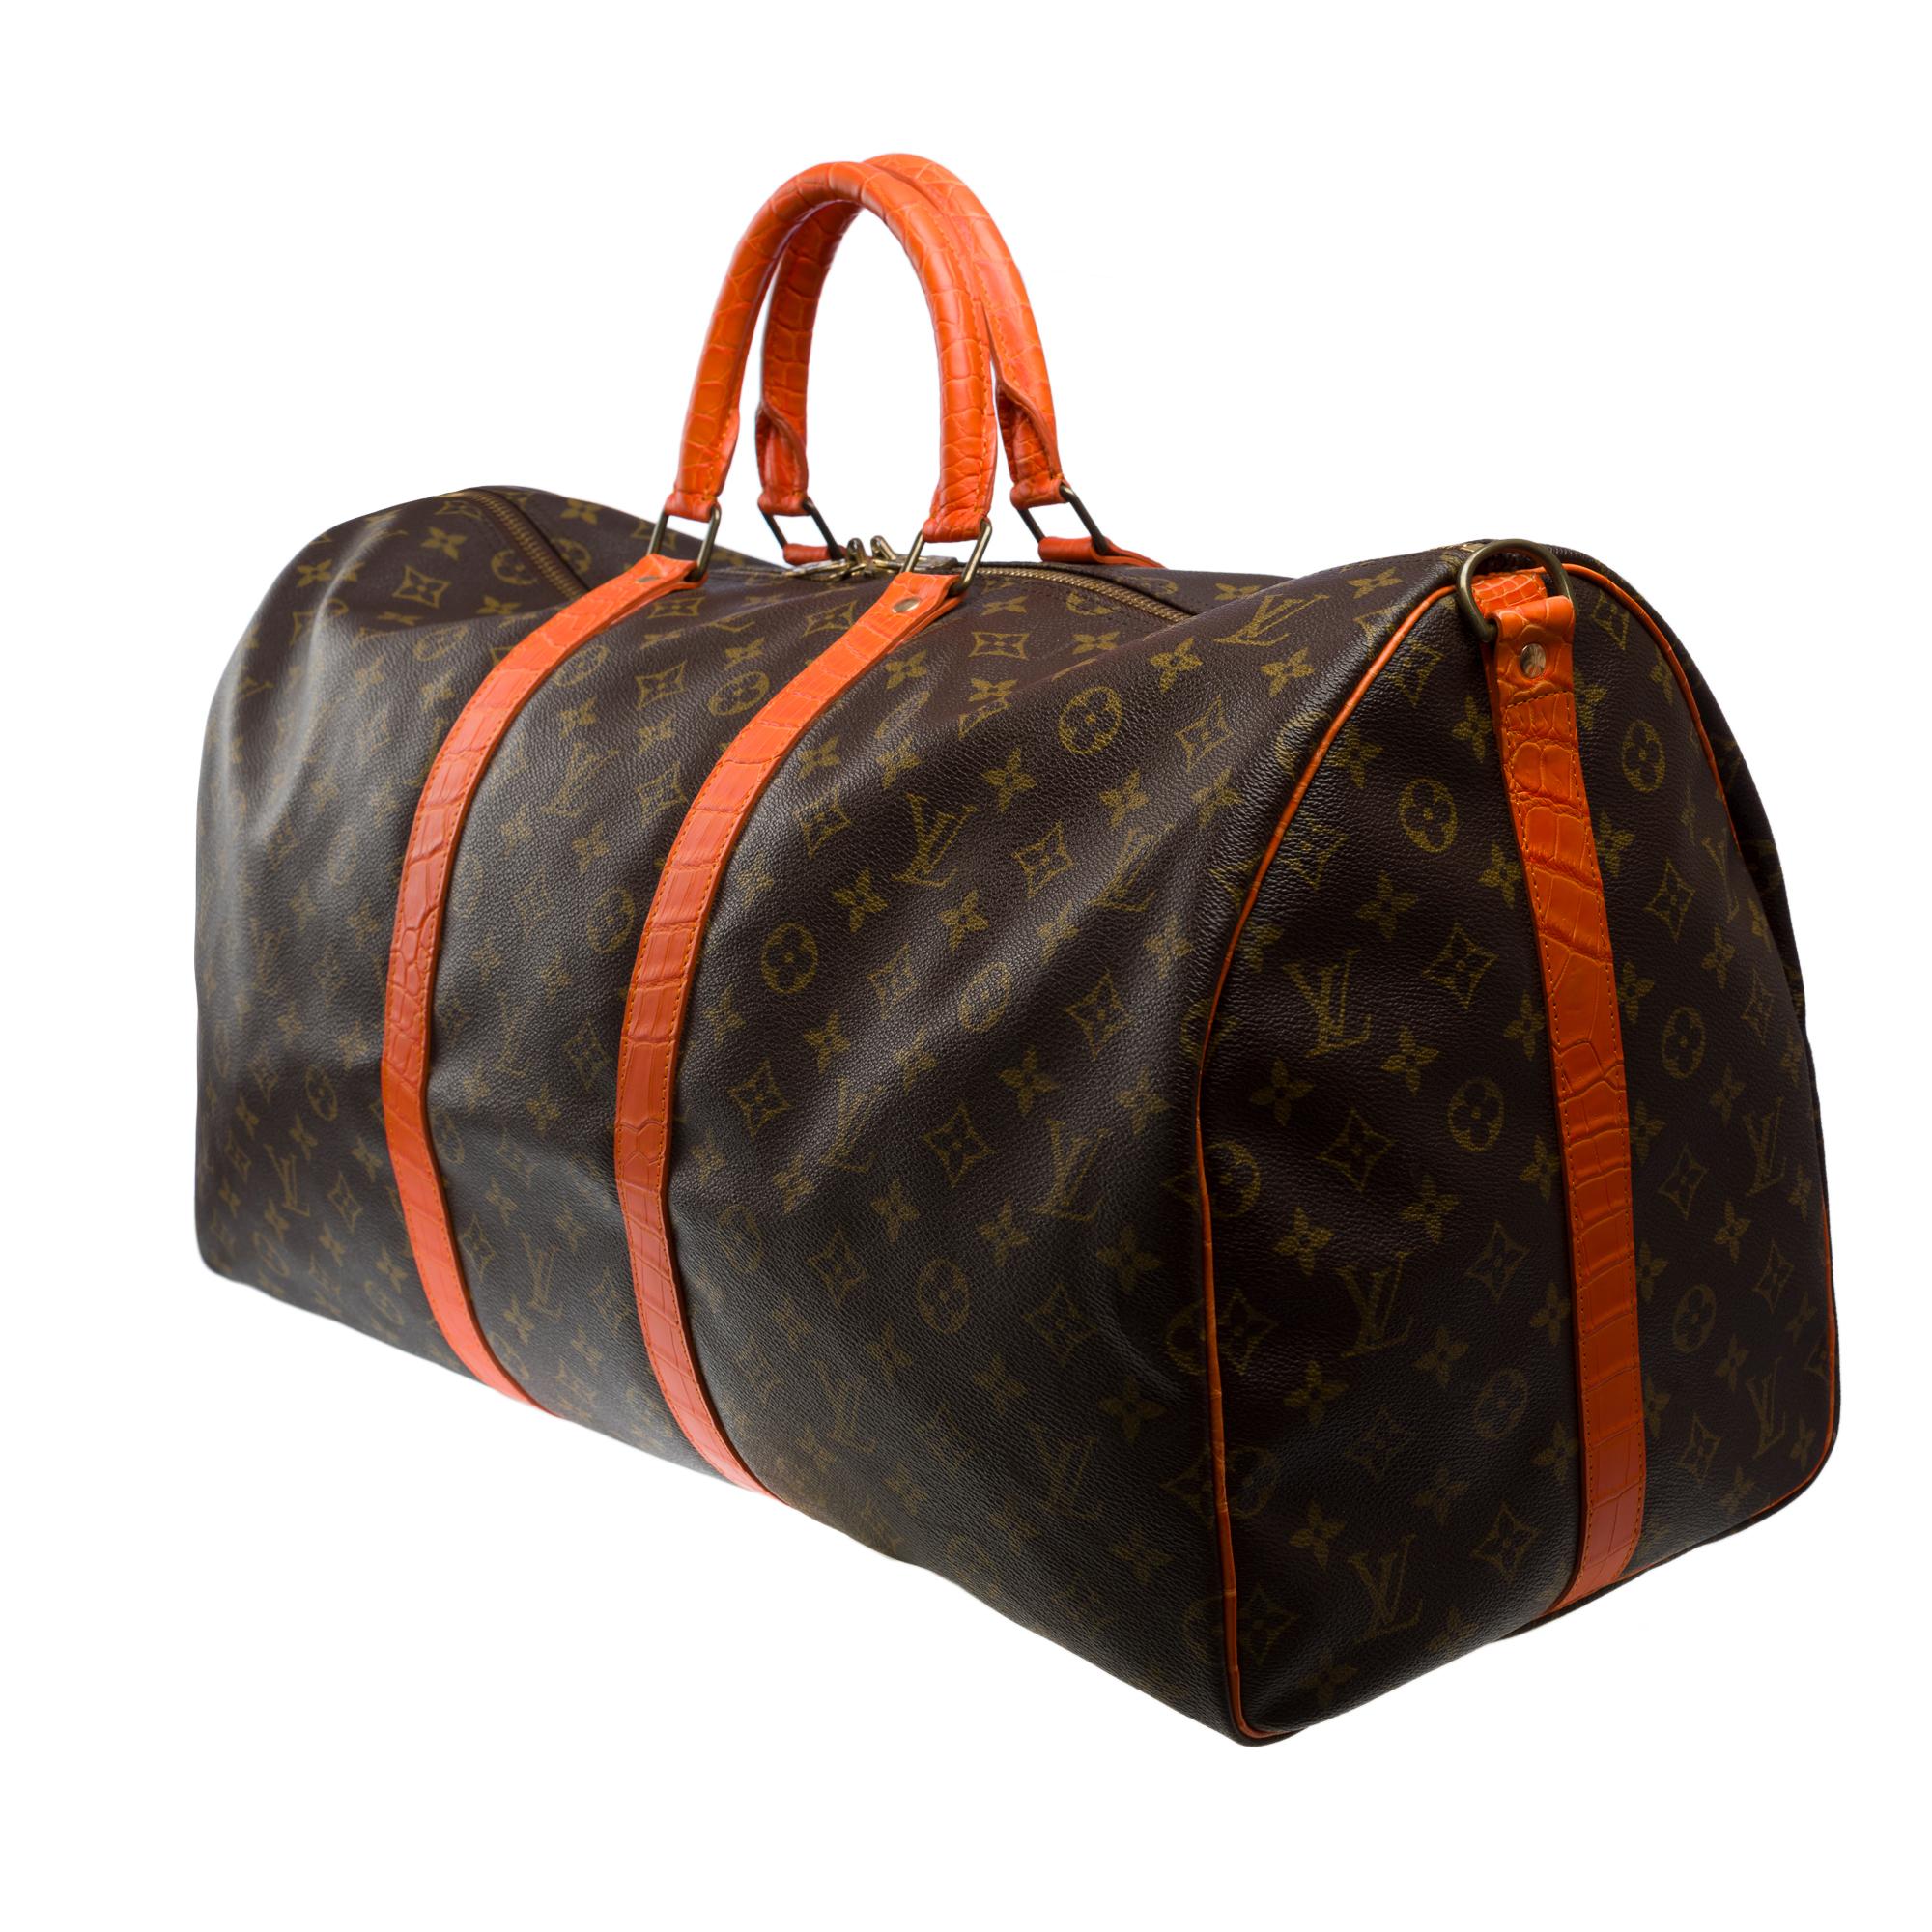 Women's or Men's Customized Louis Vuitton Keepall 55 strap Travel bag with Orange Crocodile For Sale